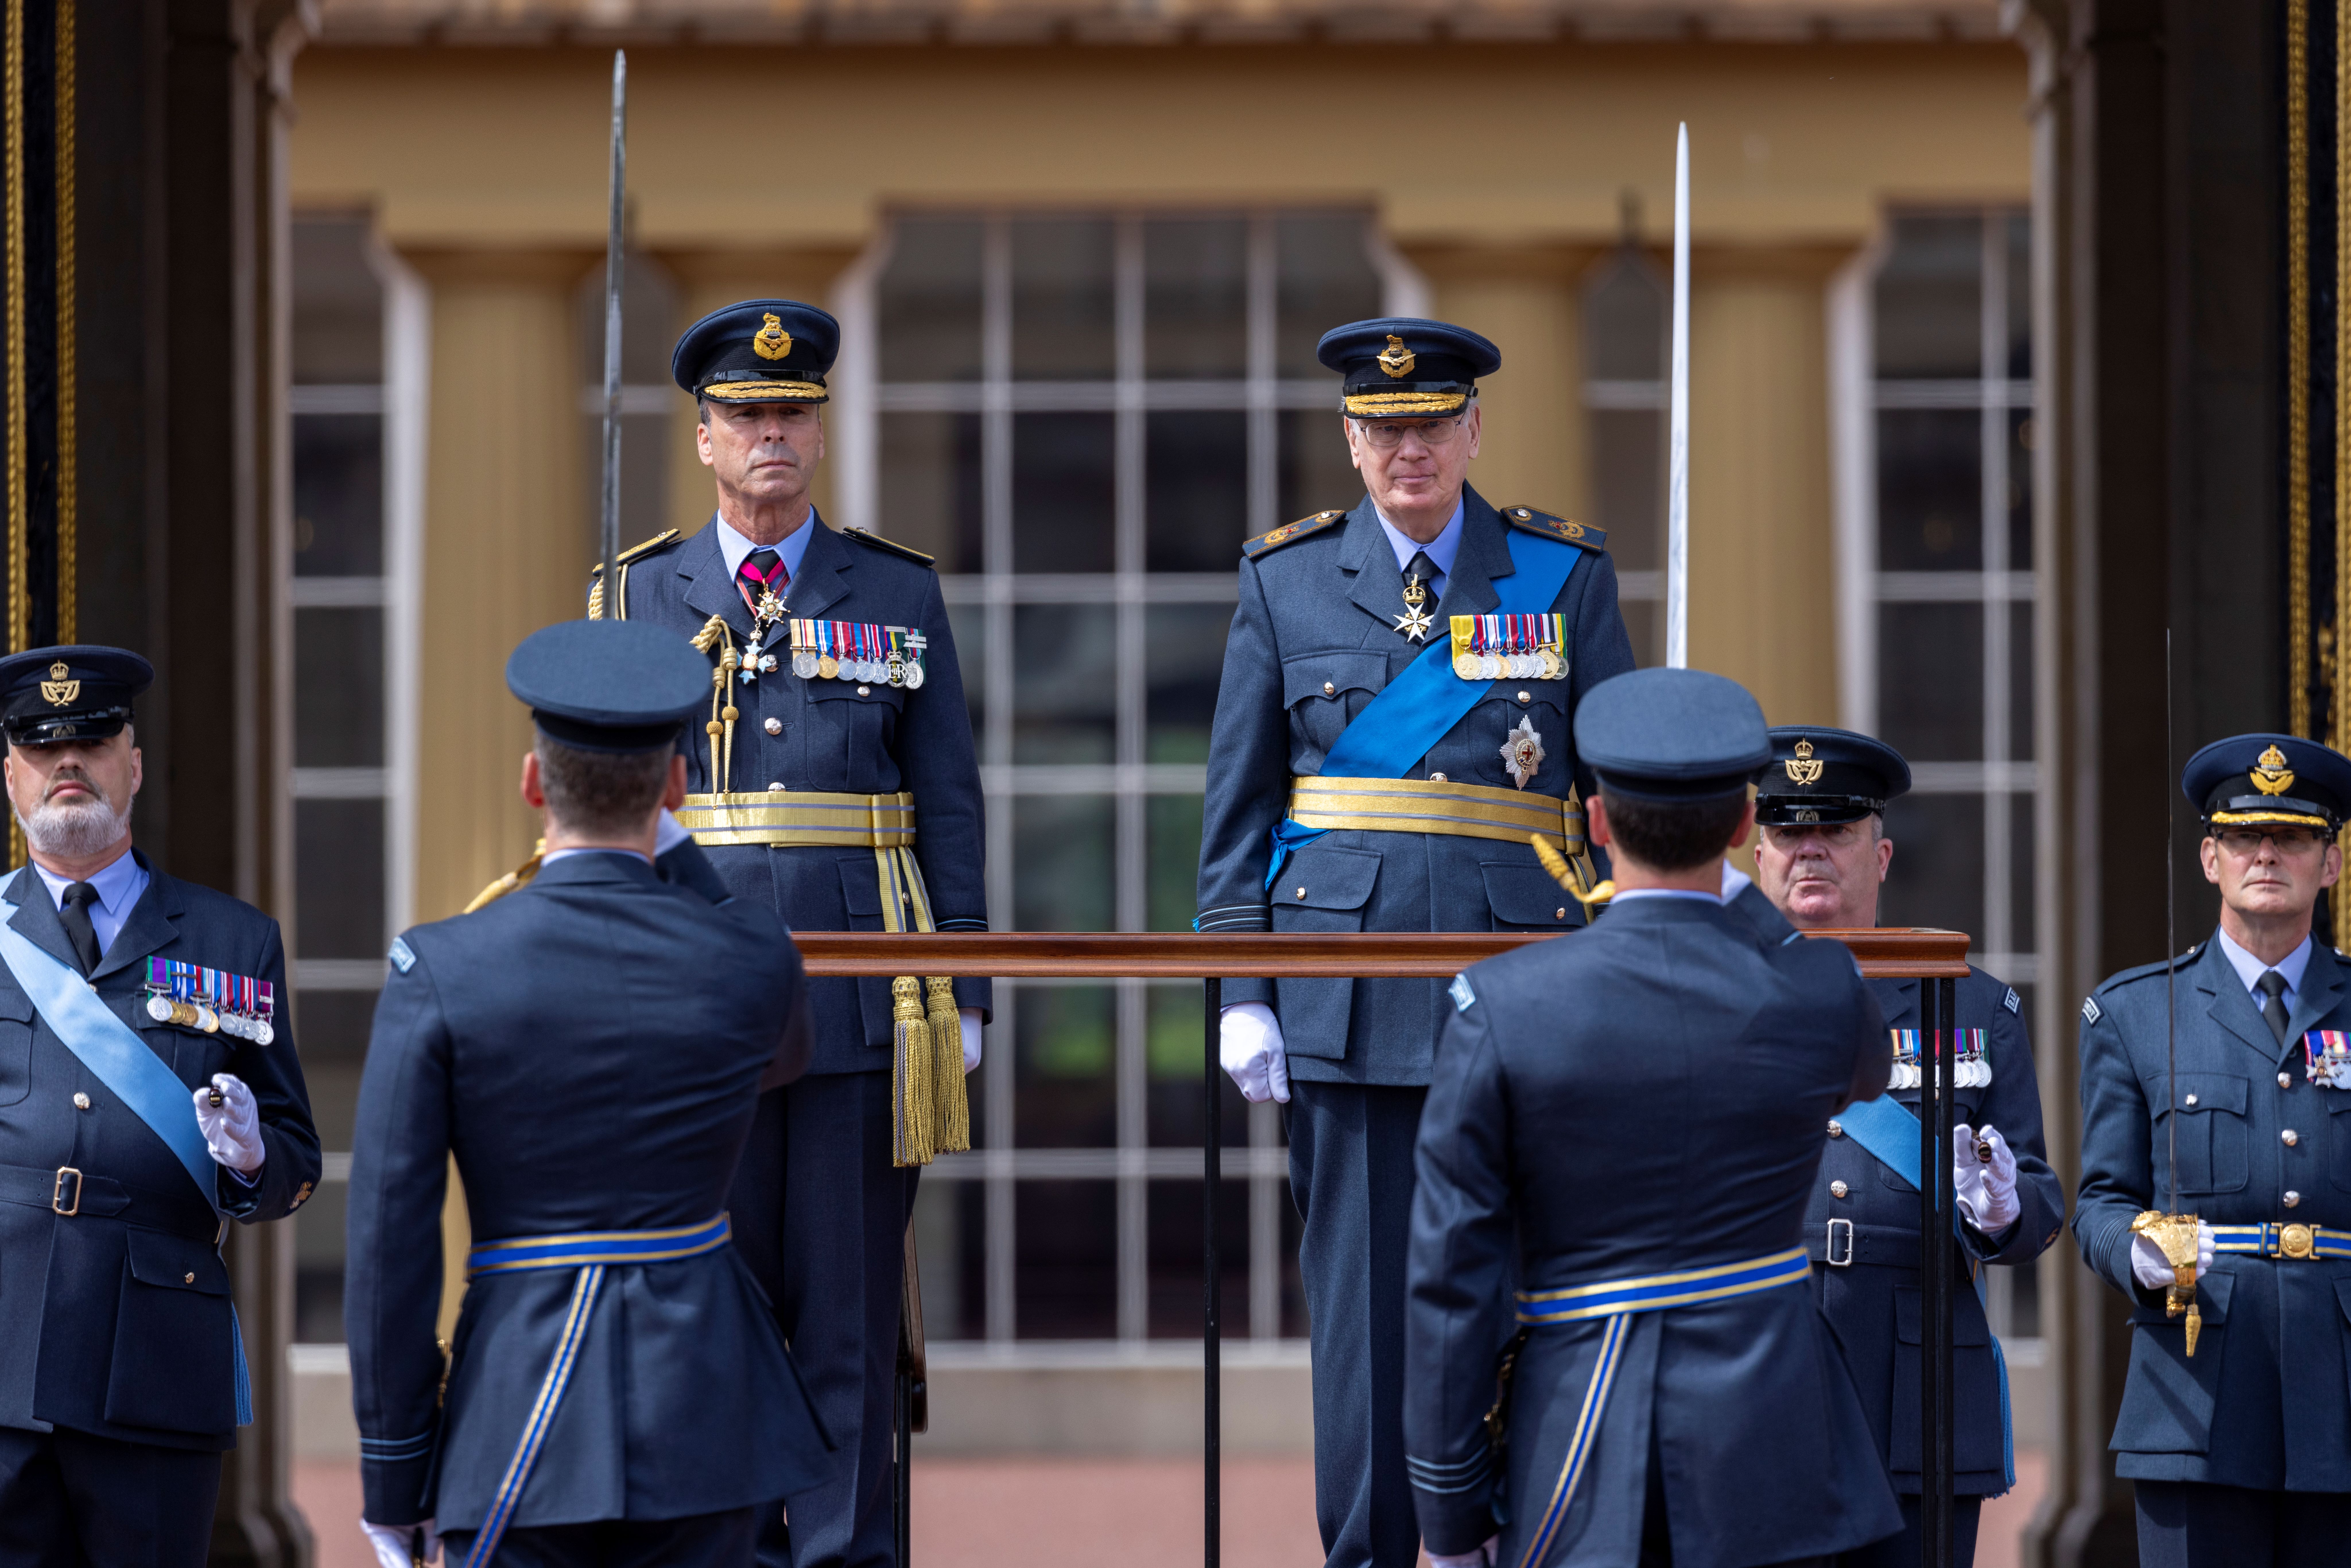 HRH Duke of Gloucester reviewing the standards of the Royal Auxiliary Air Force